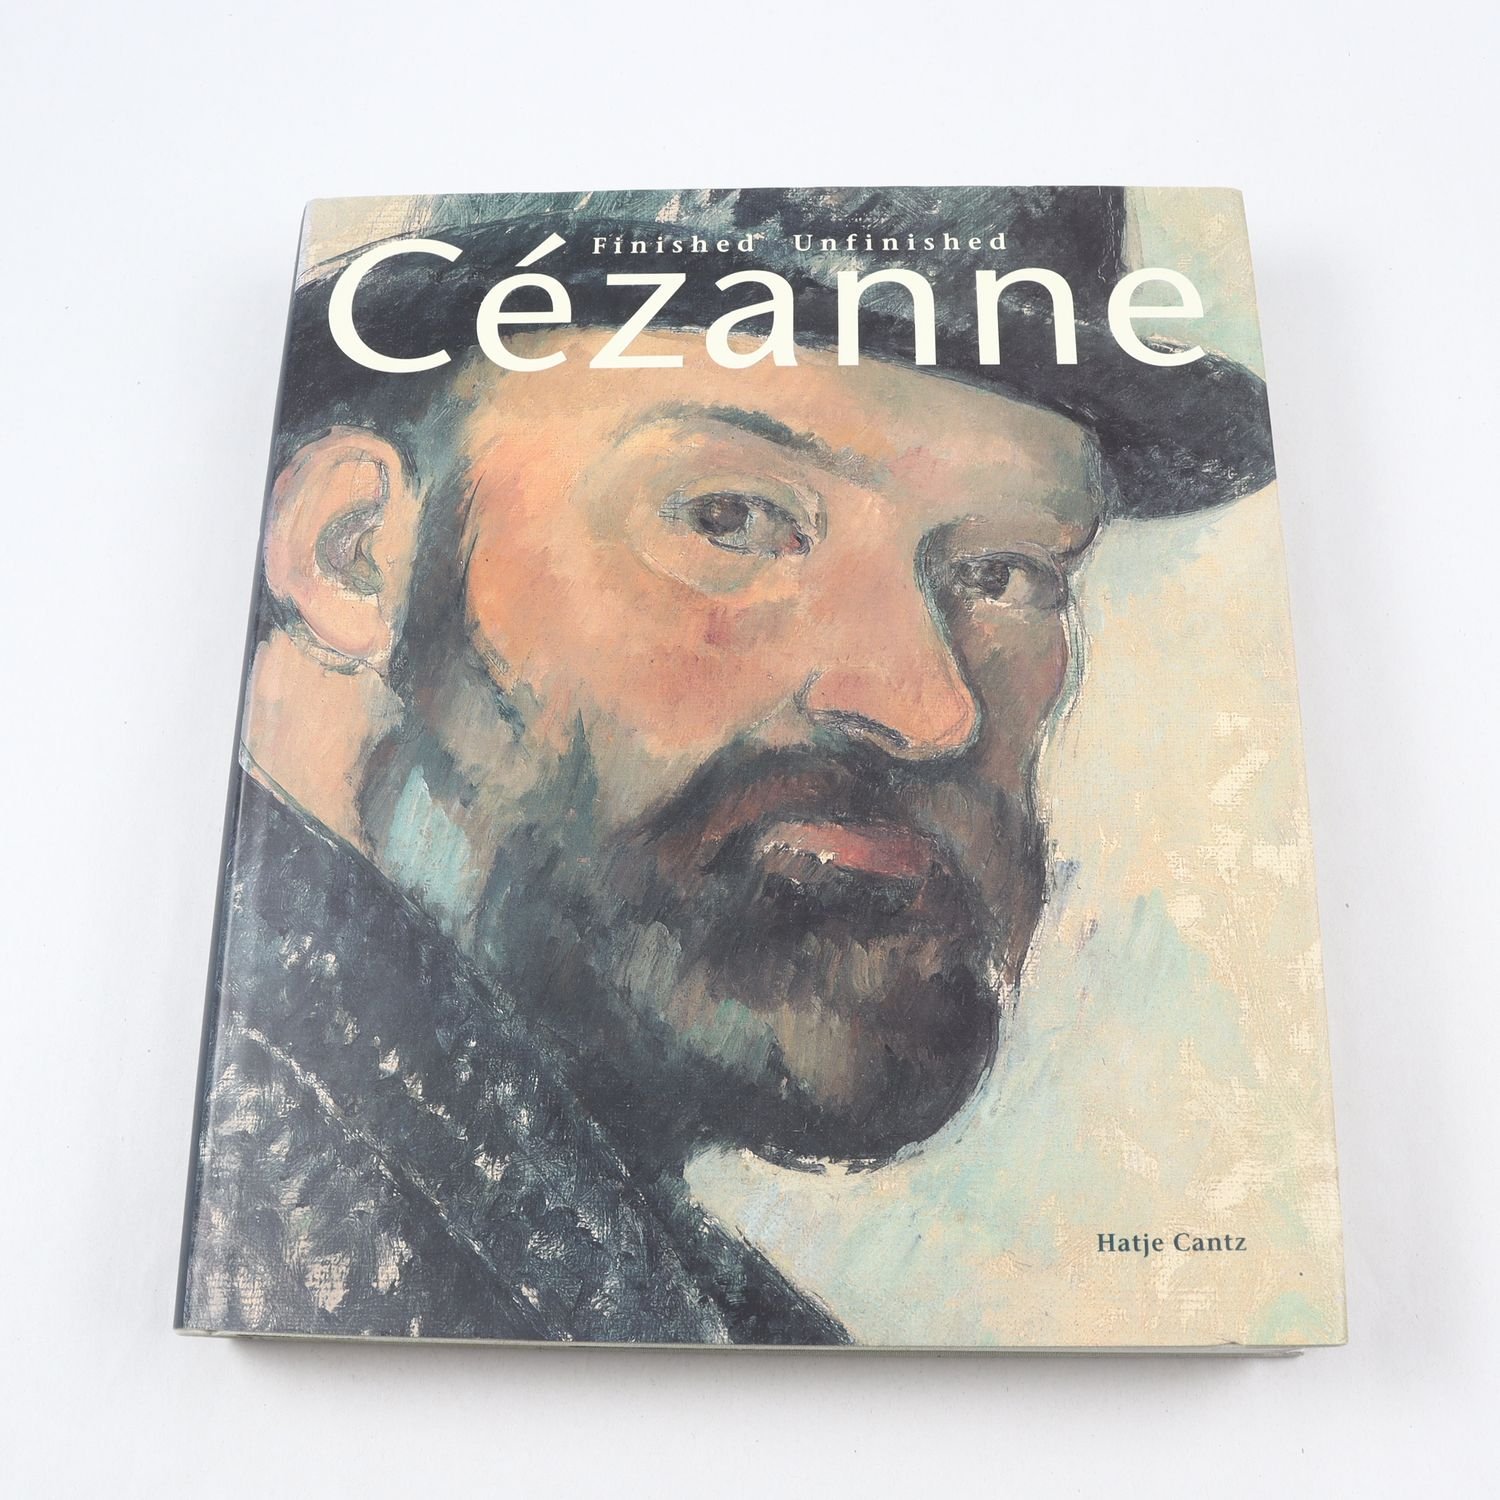 Cézanne, Finished Unfinished.